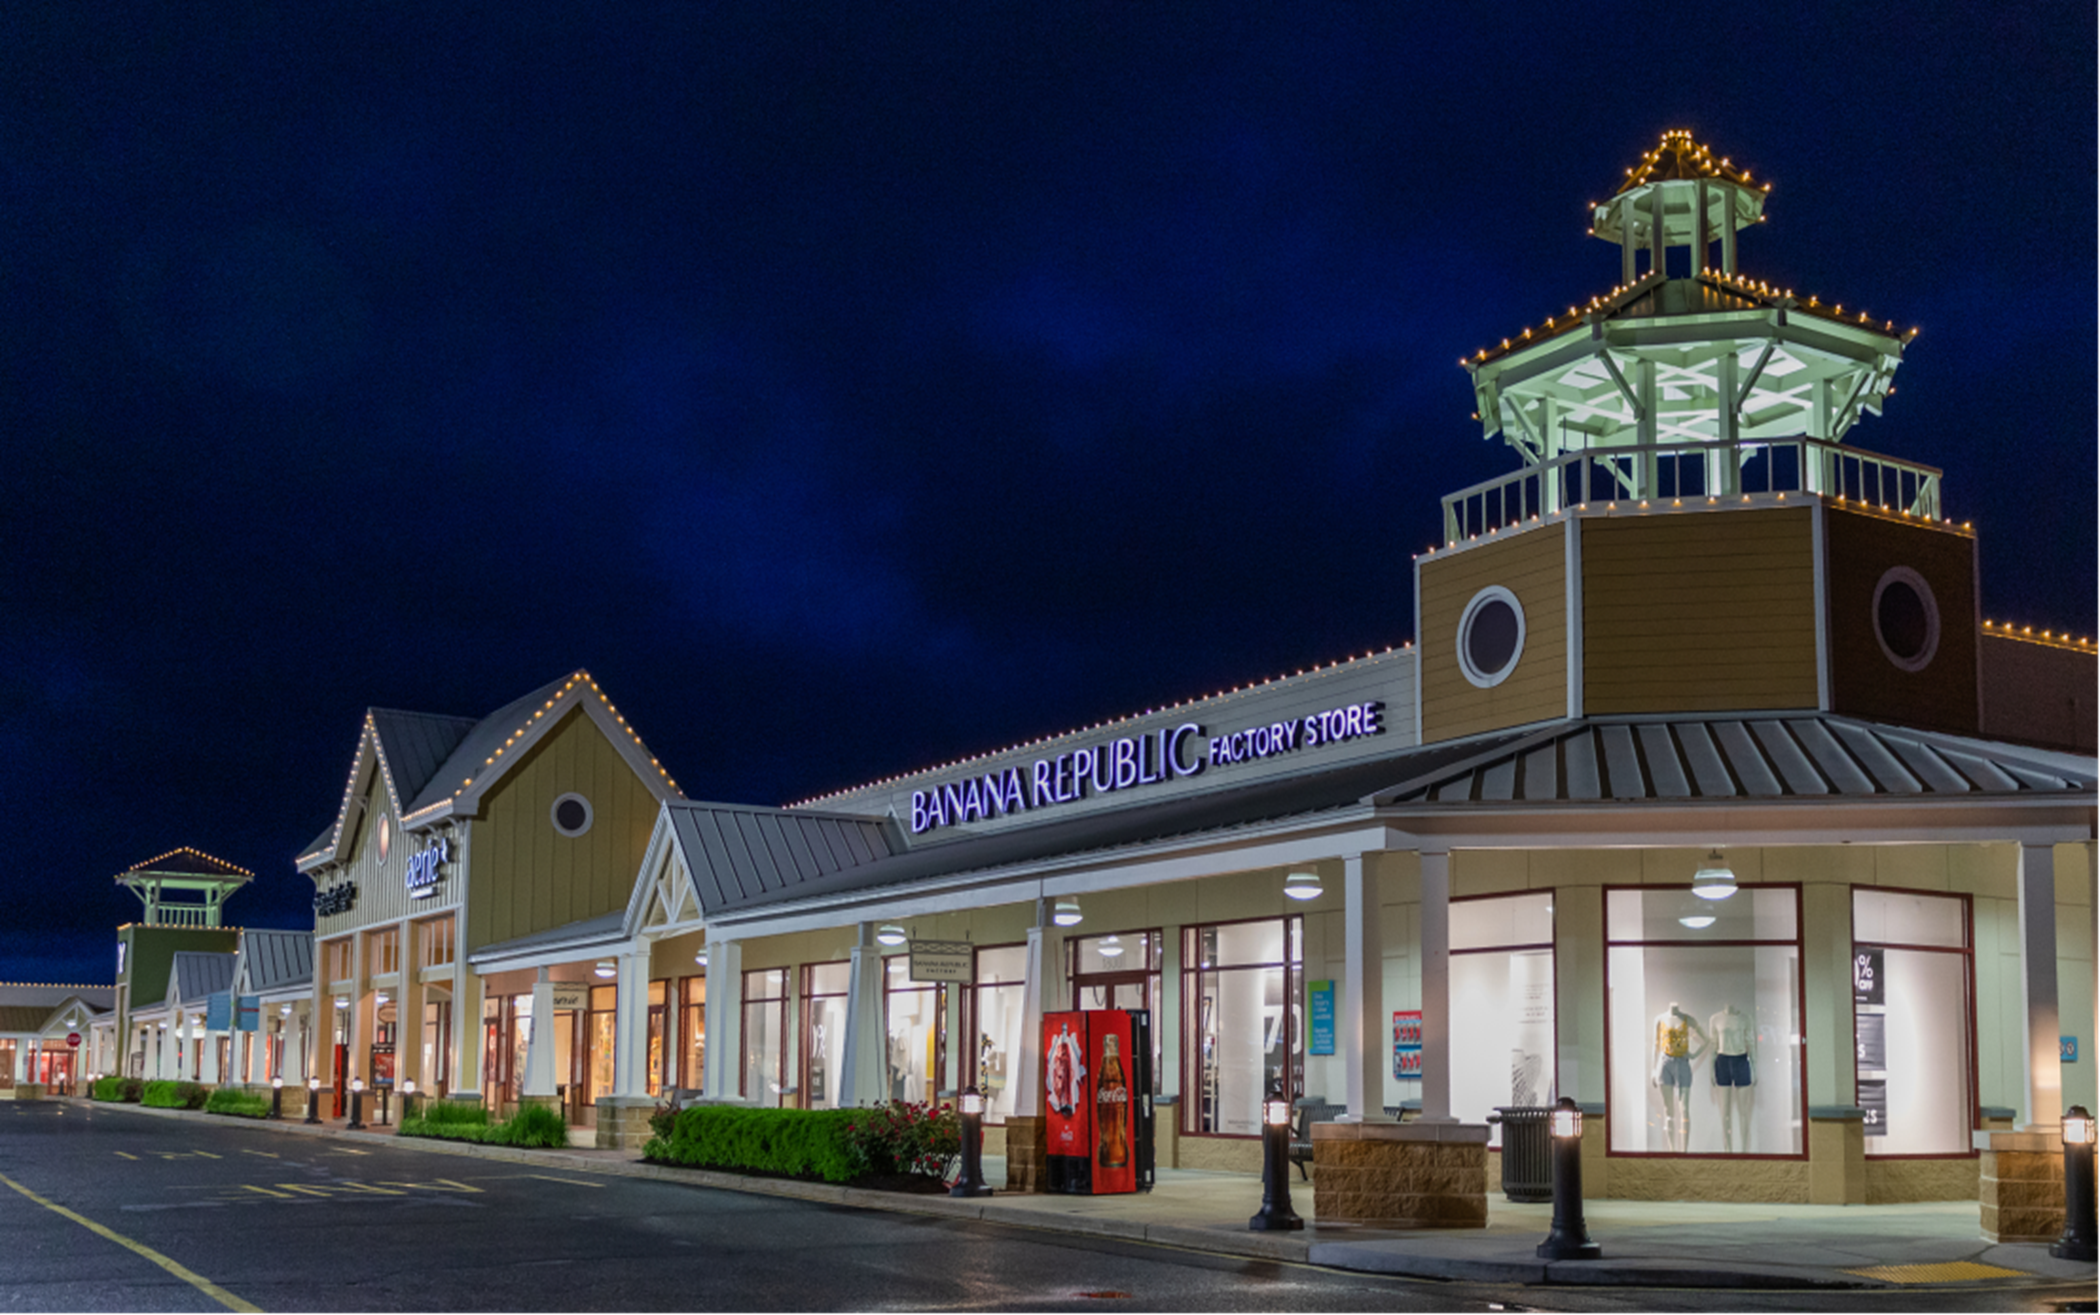 Tanger Outlets at night